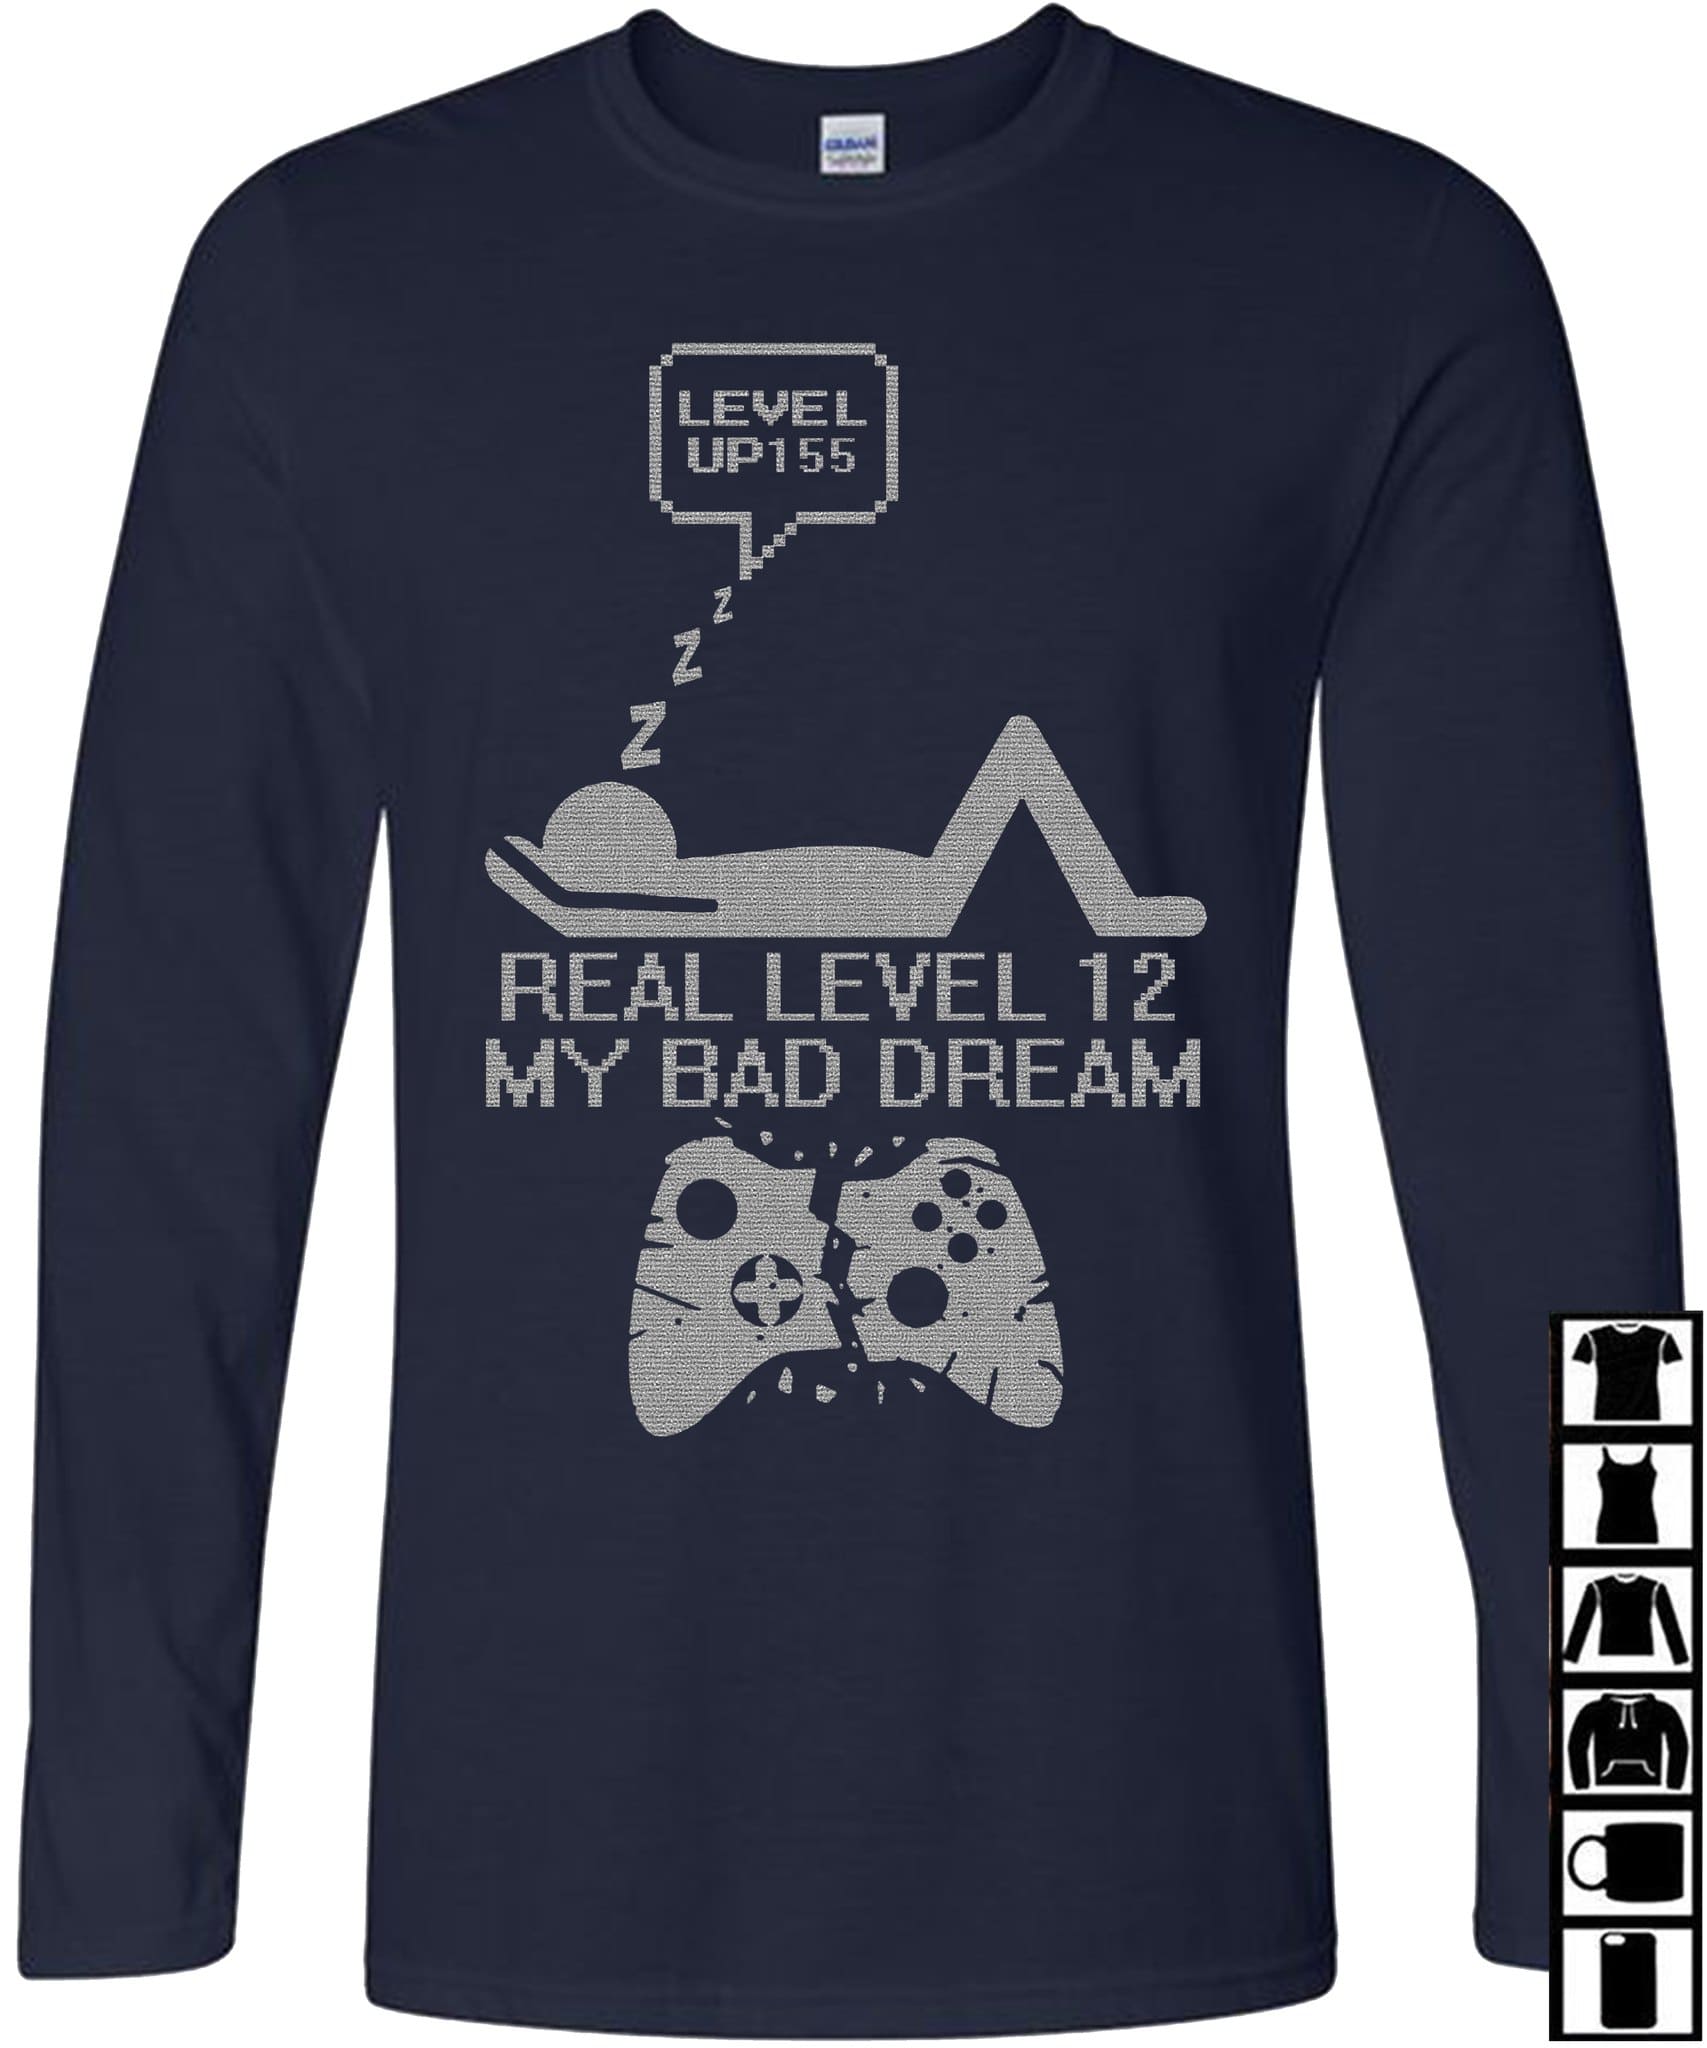 Real level 12, my bad dream - Sleeping gamer, addicted to game